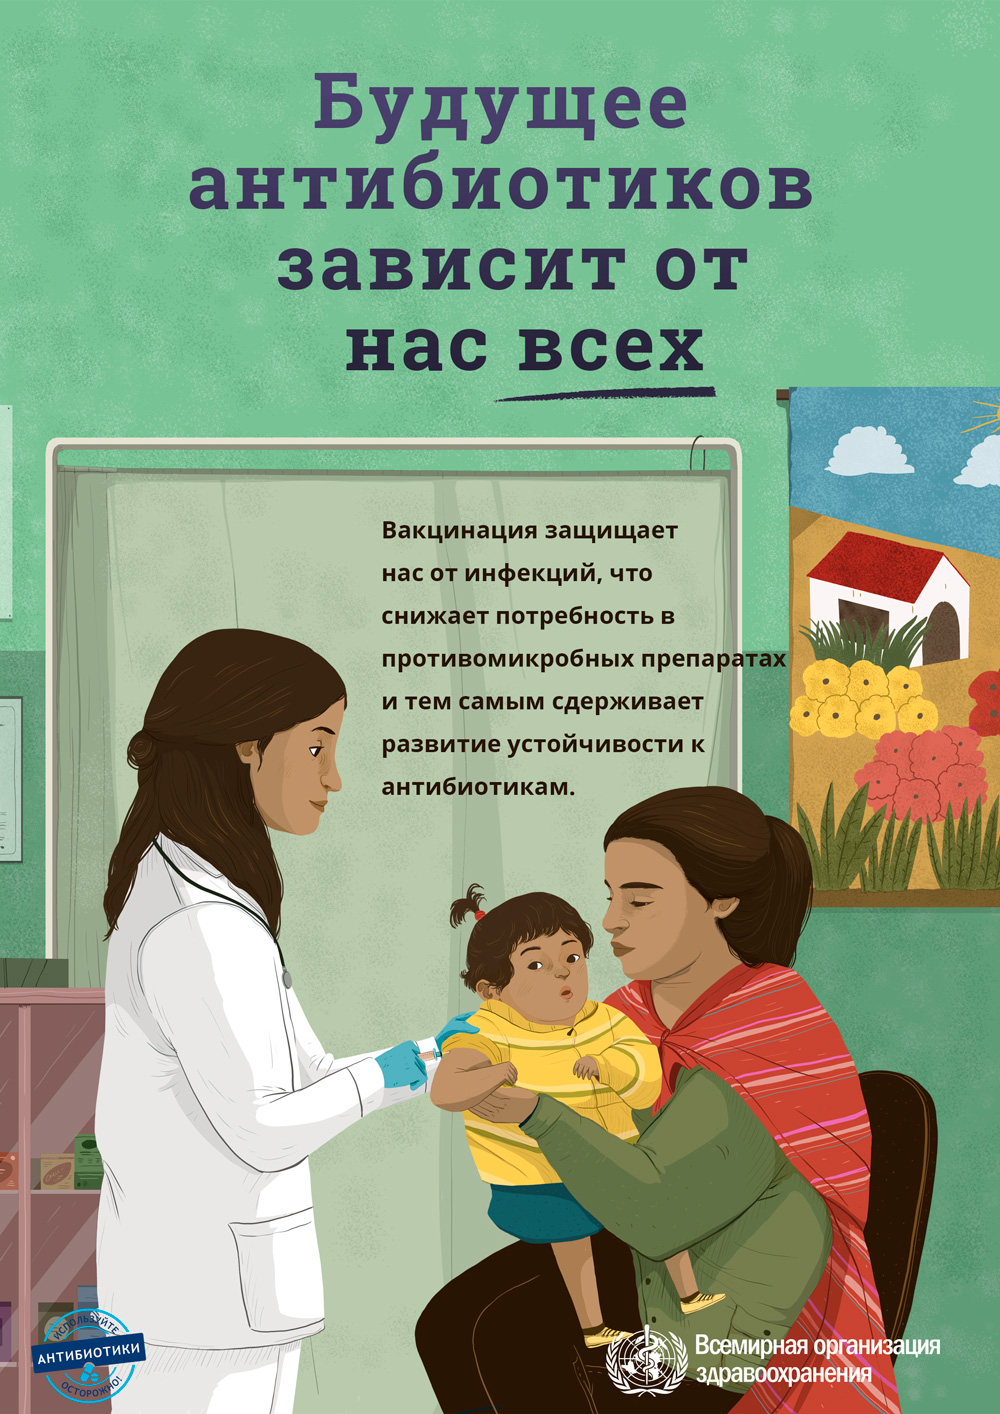 Poster 5 Vaccination RU